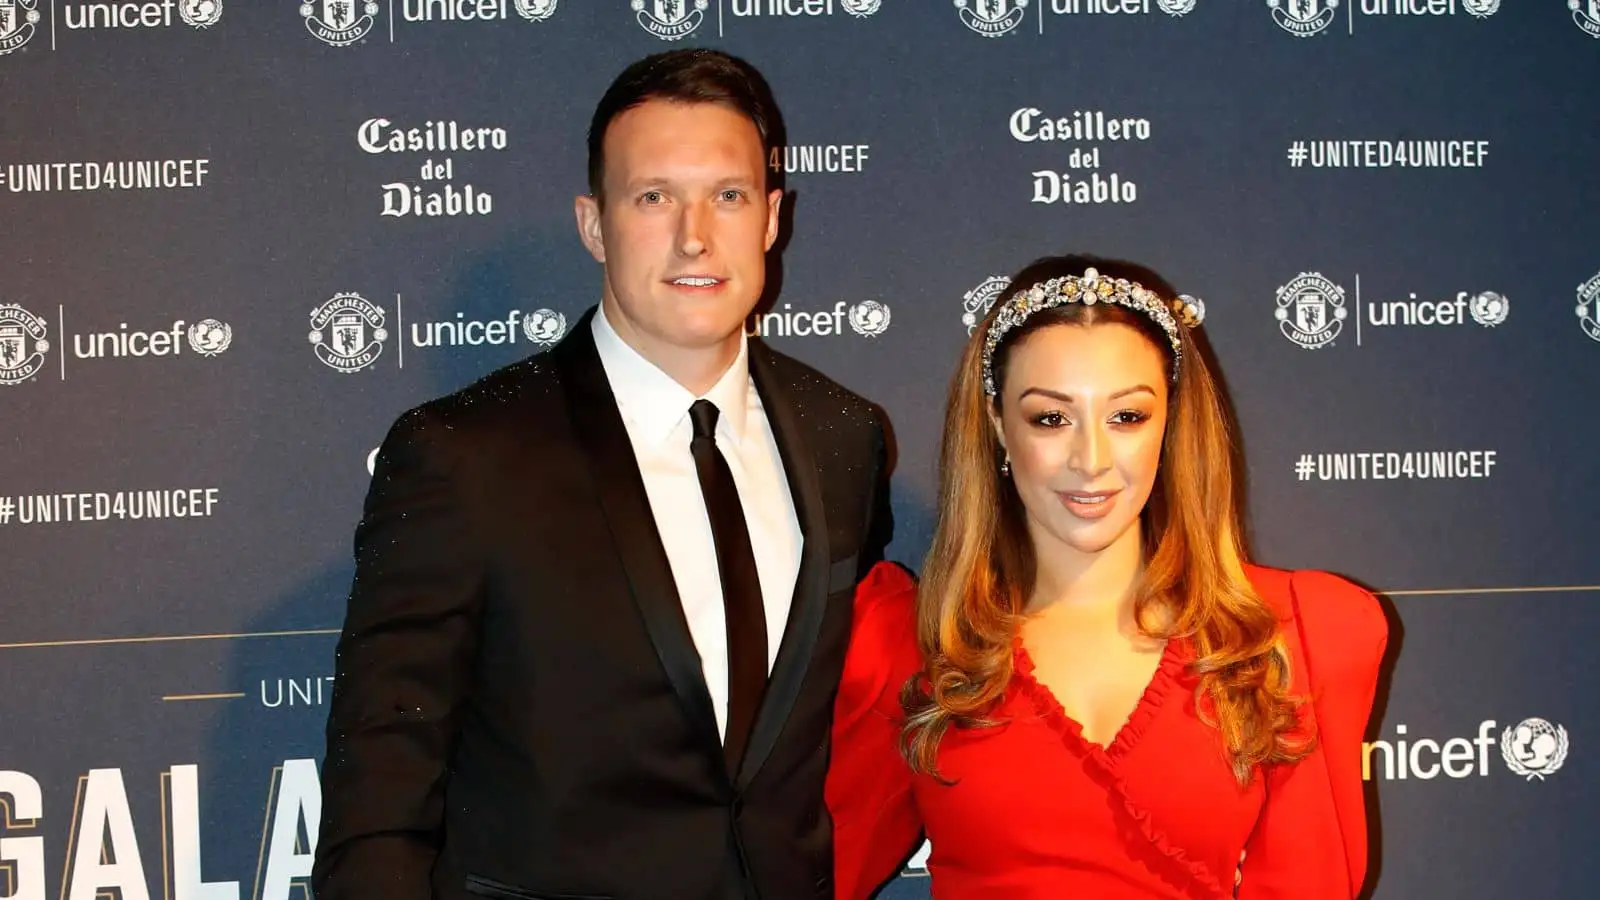 Phil Jones and wife Kaya Hall during the red carpet arrivals for the Manchester United United for Unicef Gala Dinner at Old Trafford